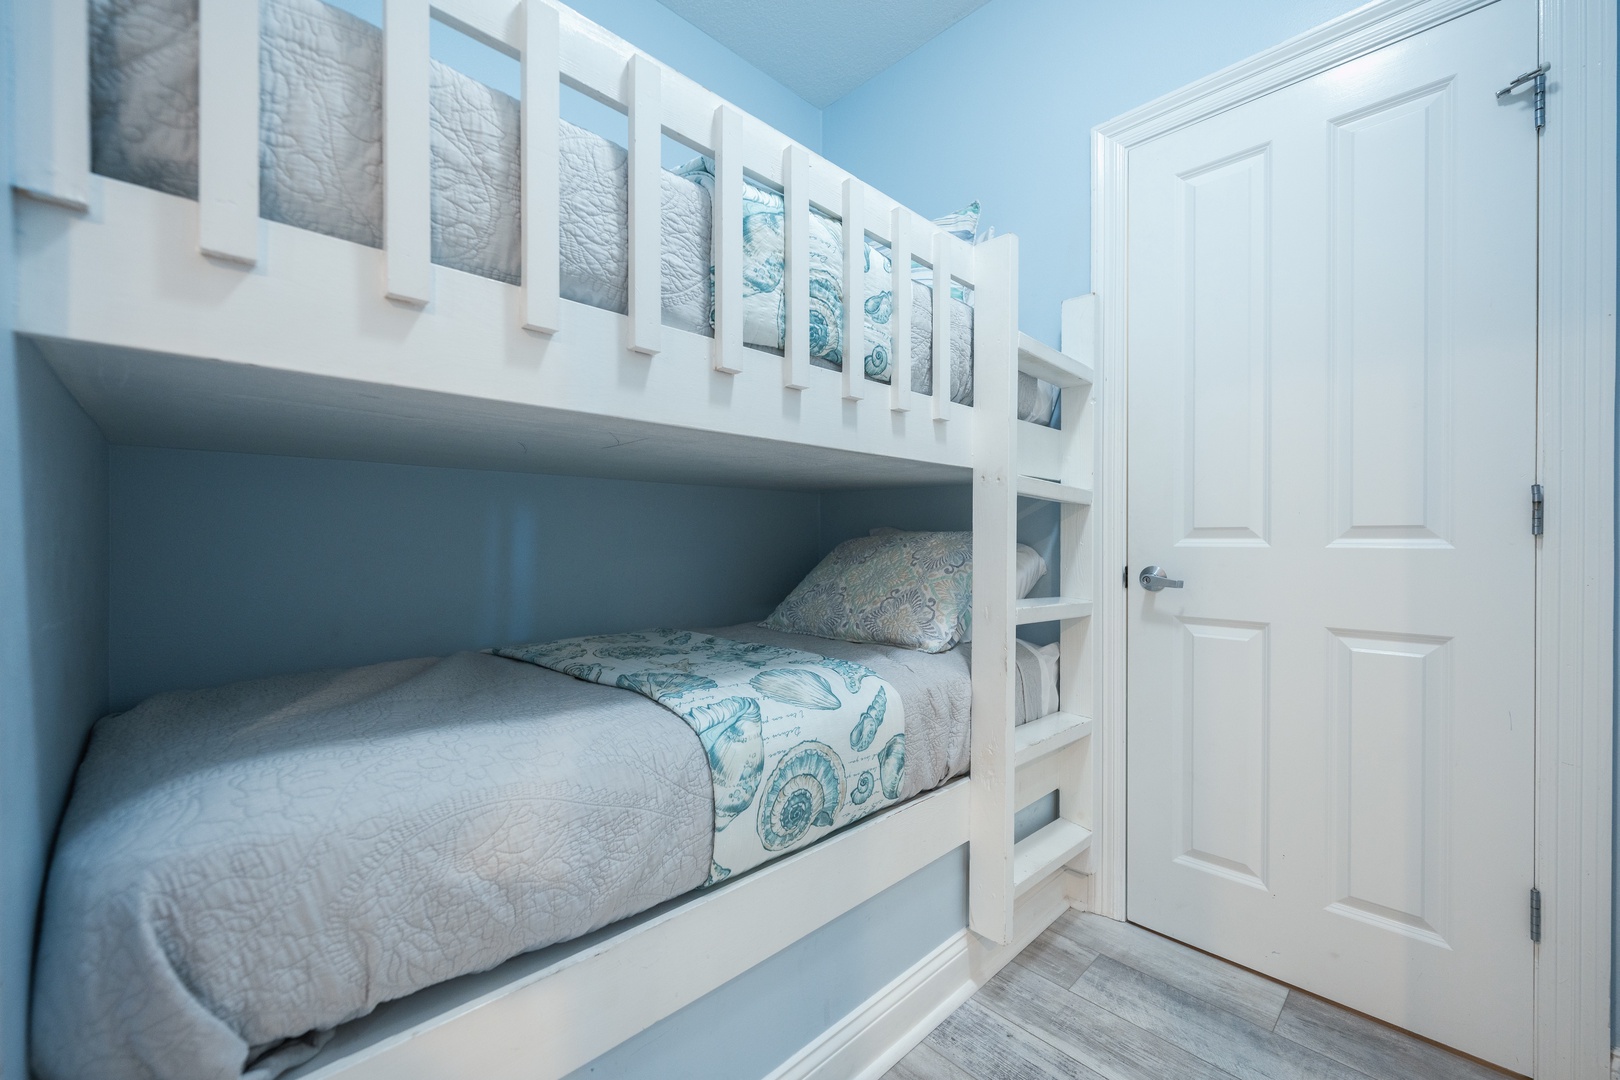 Twin-over-twin bunkbeds are tucked away in the hall alcove